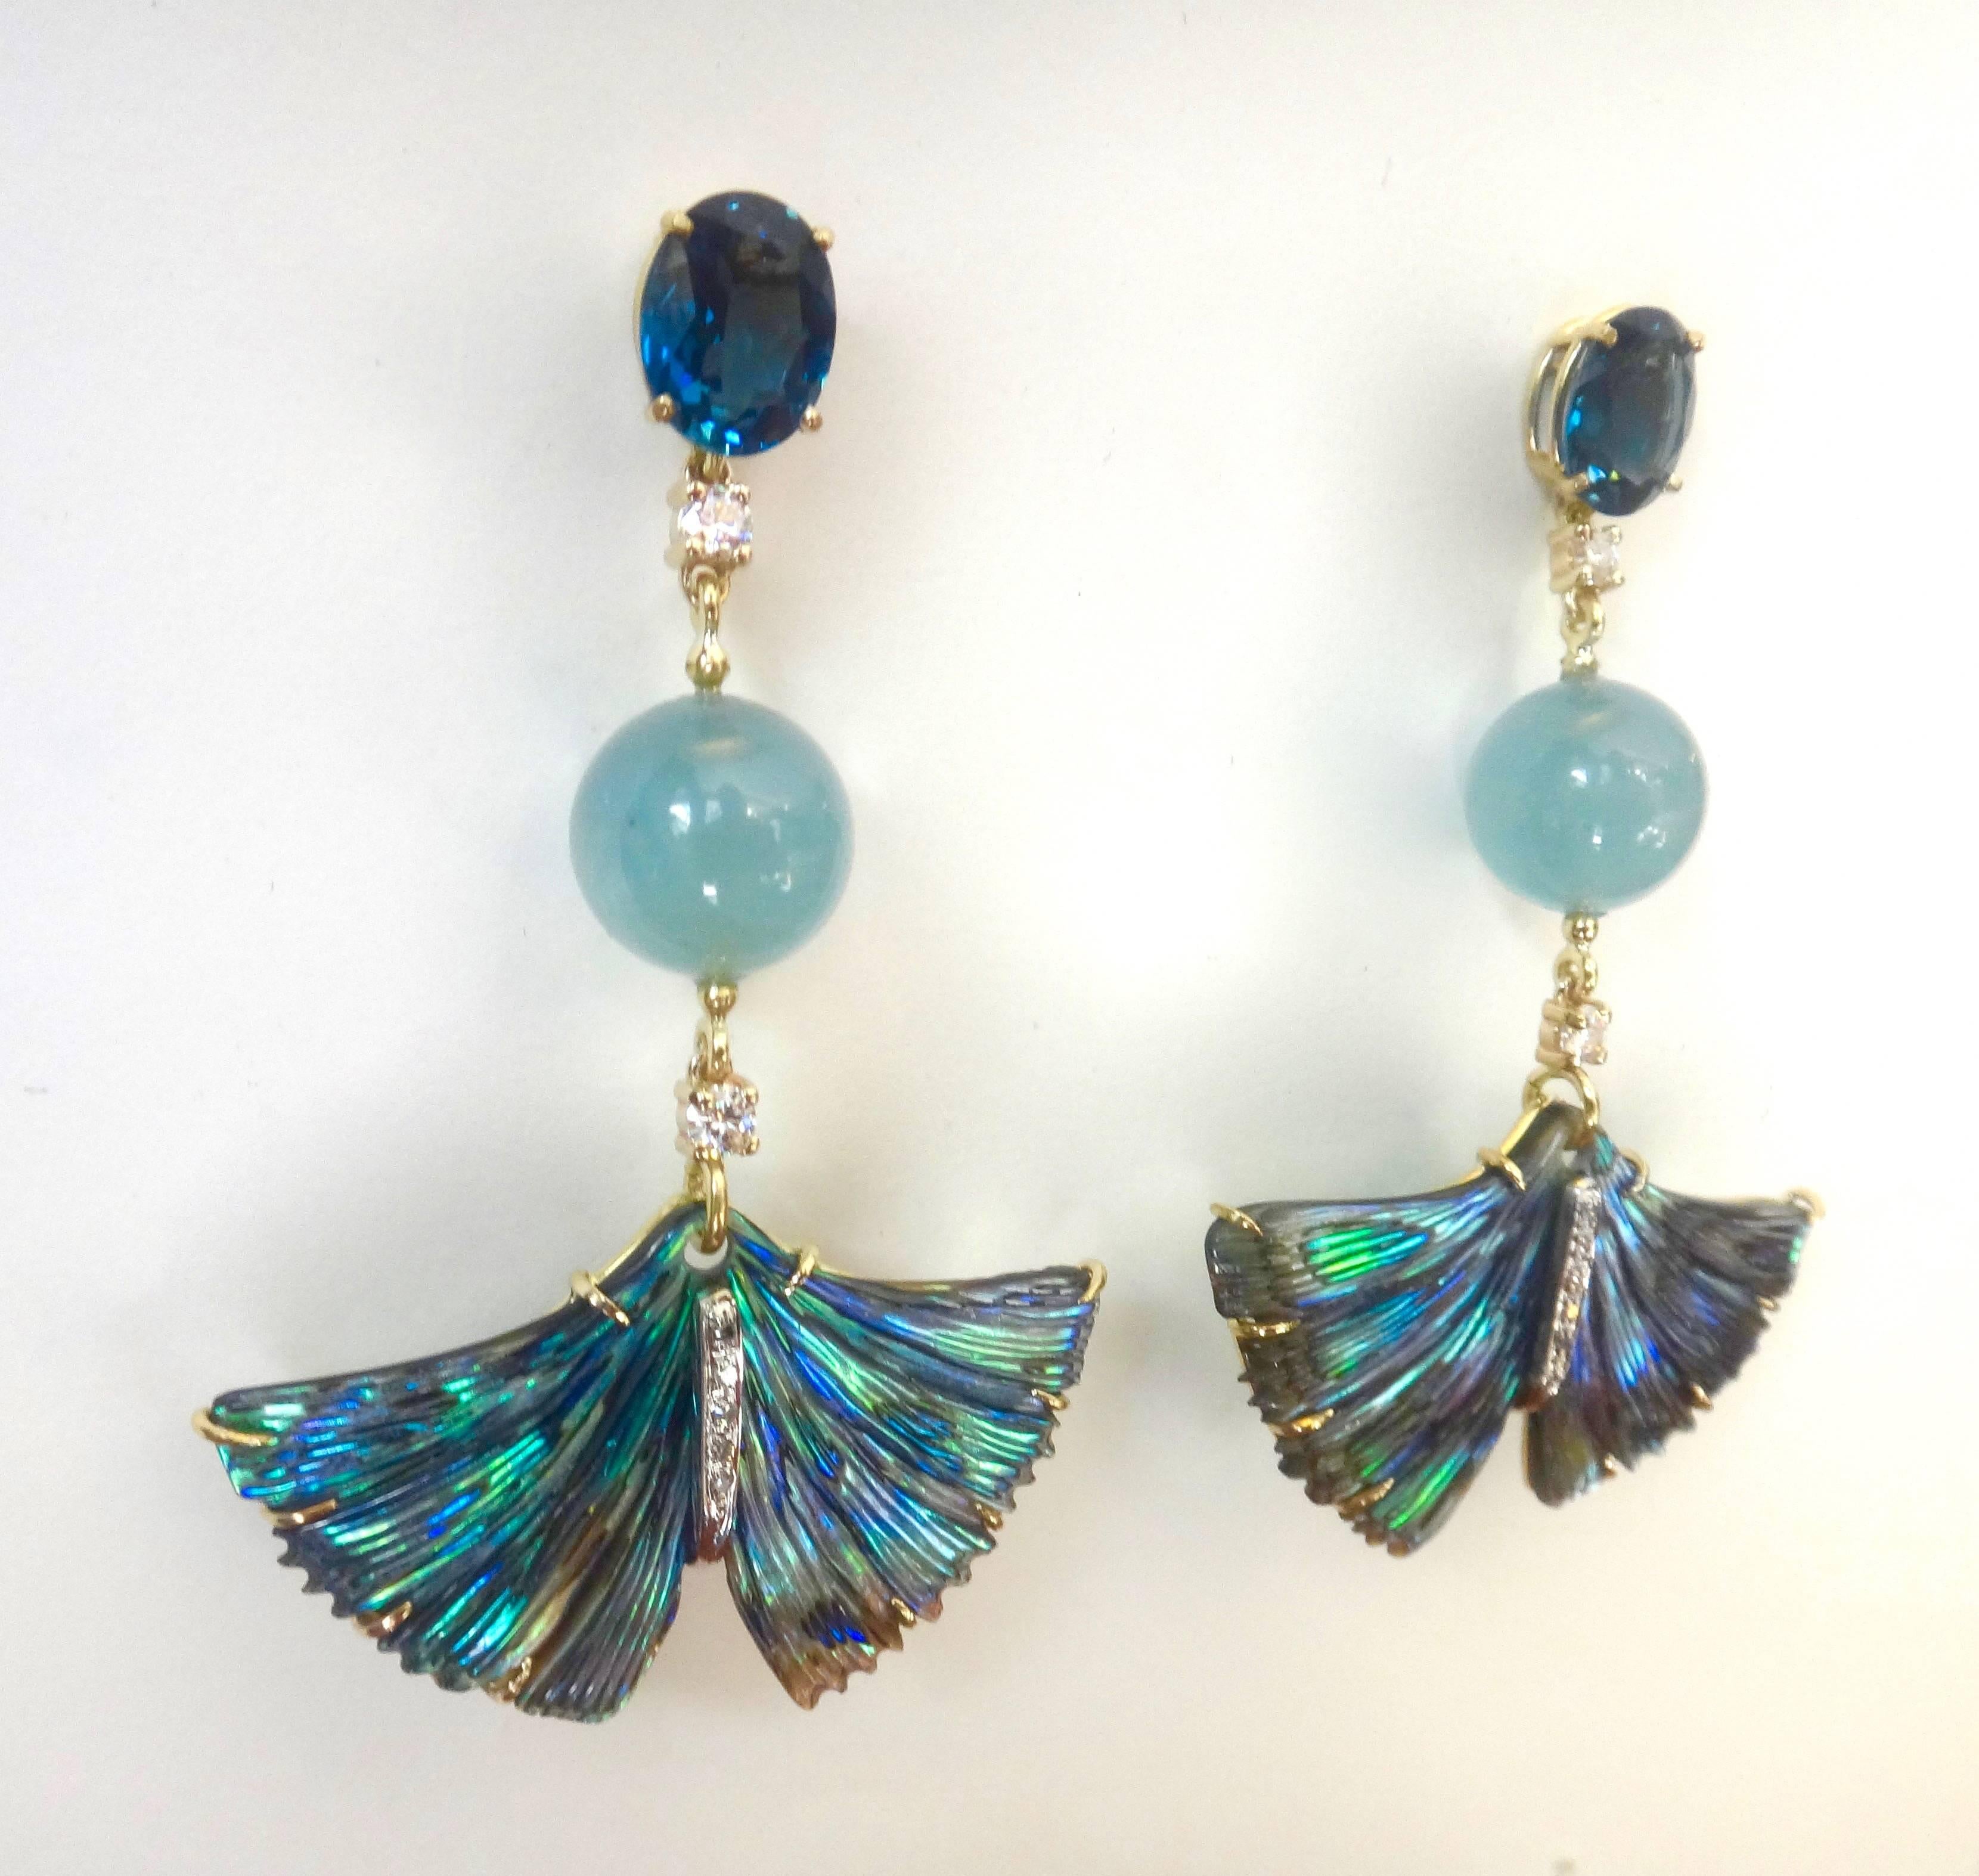 Carved abalone shell in the form of ginkgo leaves are featured in these dangle earrings.  The shades of rich blues in the shell are complimented by faceted London blue topaz, aquamarine beads and white diamonds.  All set in hand fabricated 18k